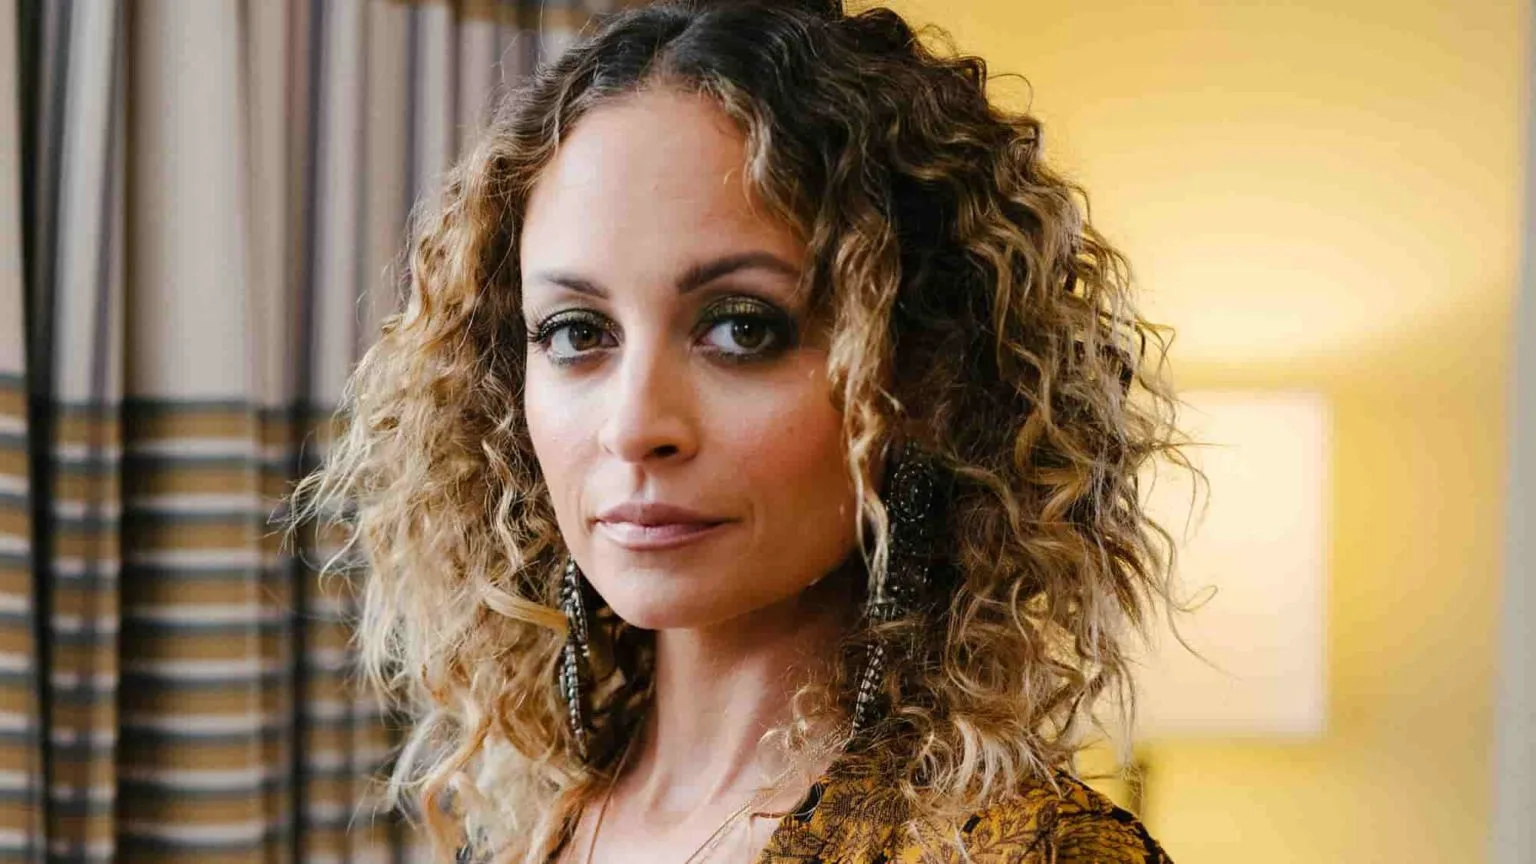 Who Is Karen Moss? All You Need To Know About Nicole Richie’s Biological Mother